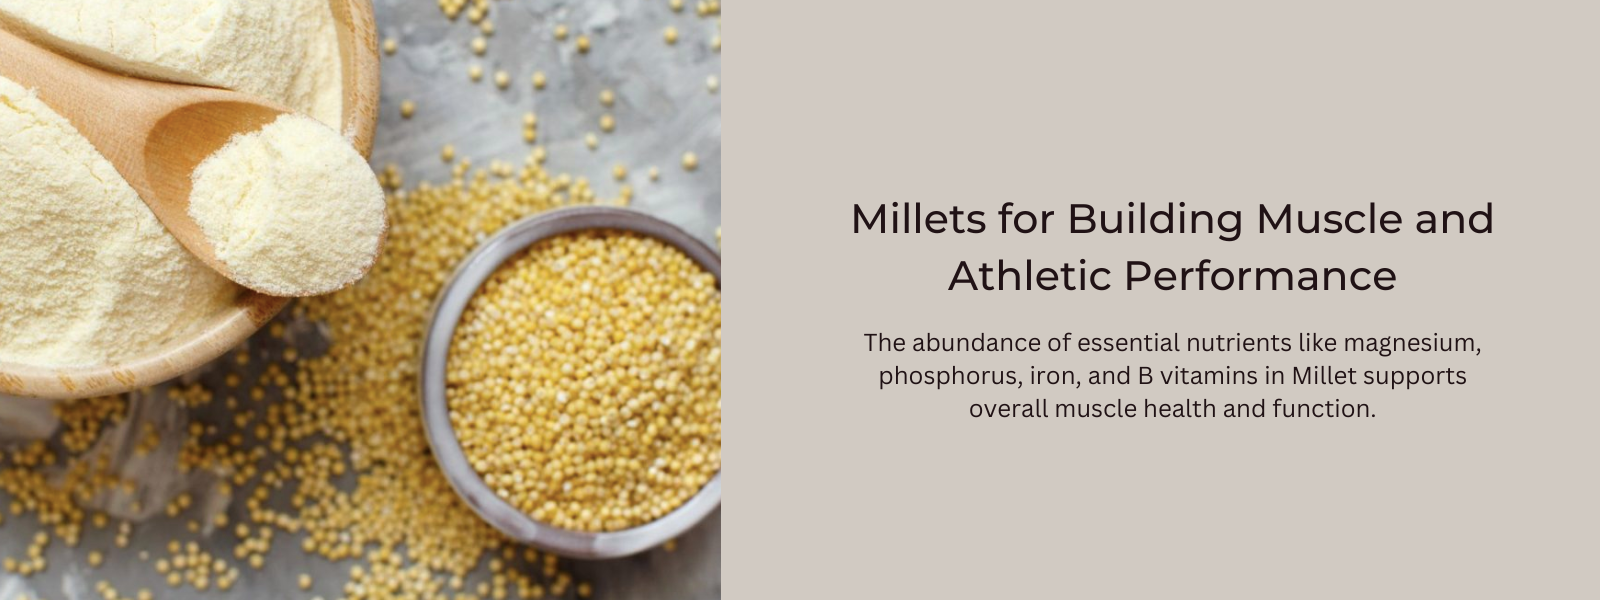 Millets for Building Muscle and Athletic Performance